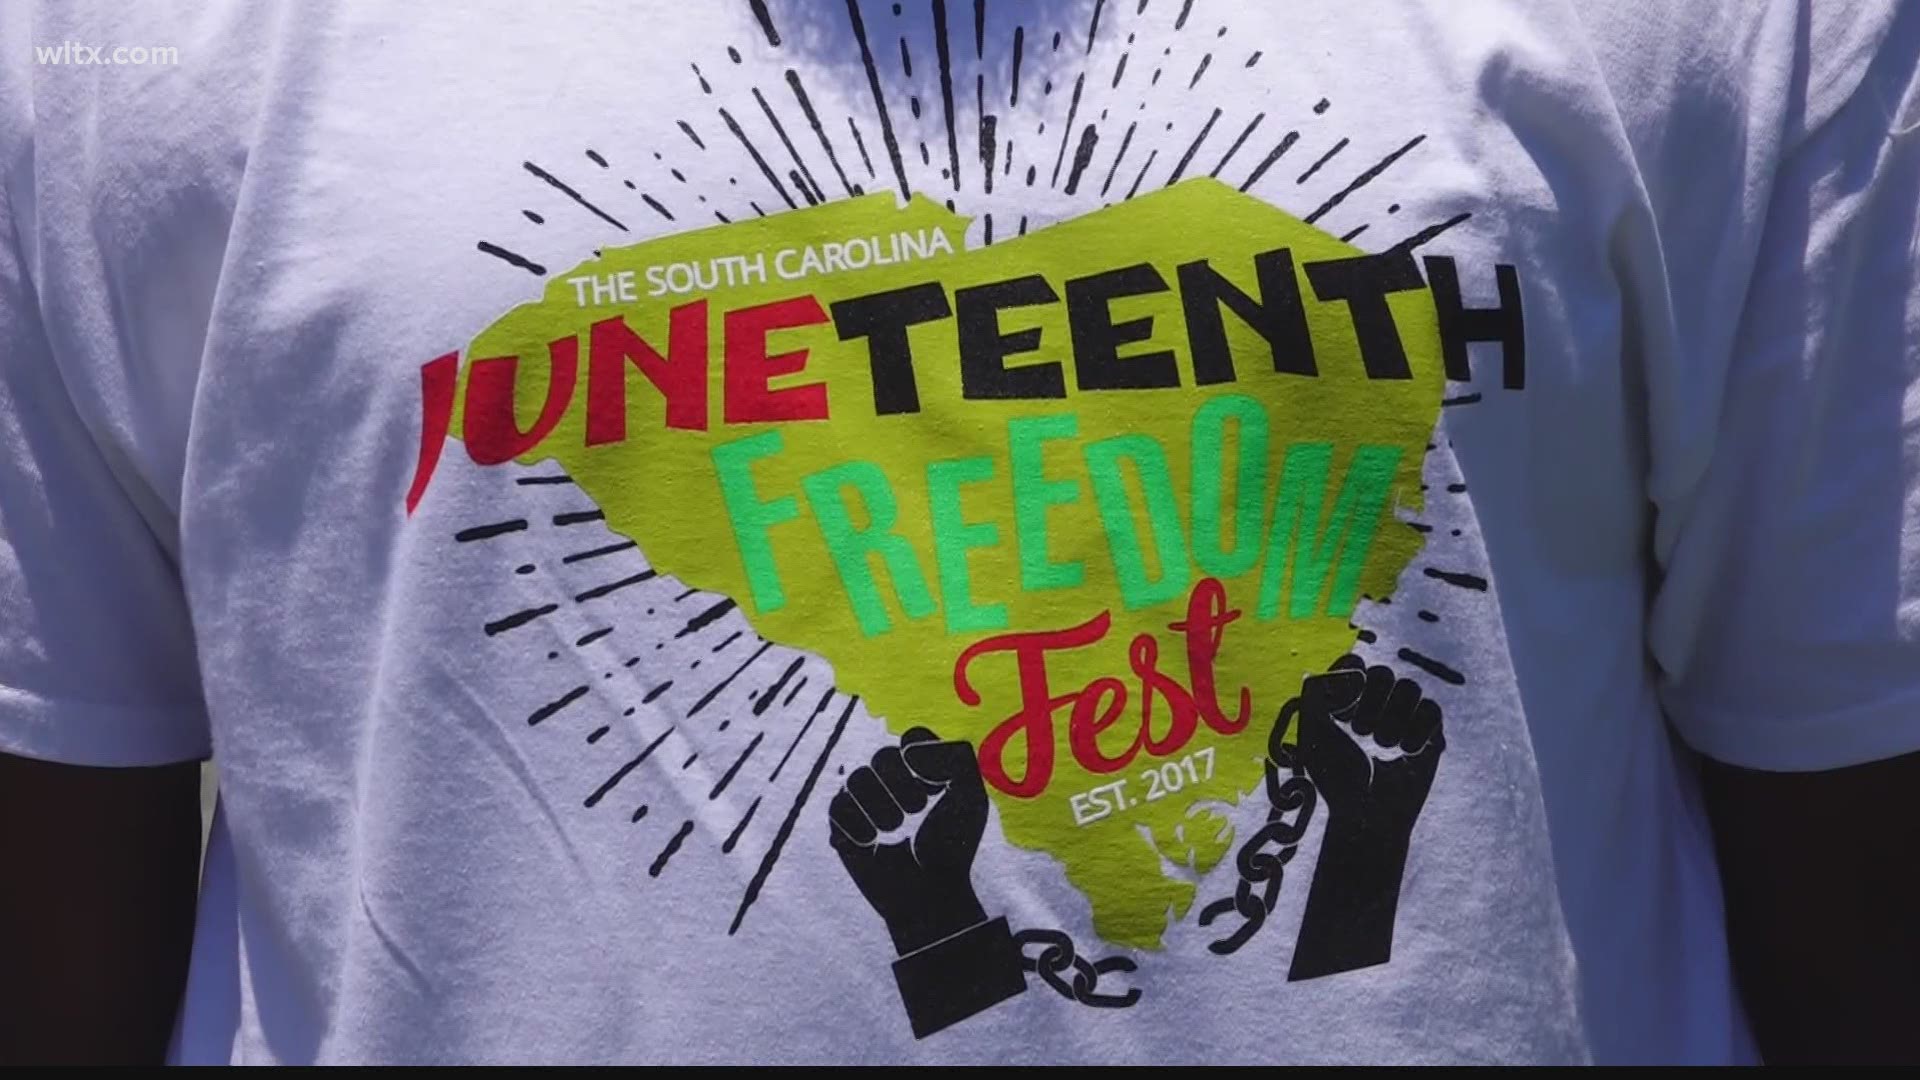 This weekend, people will have the opportunity to celebrate Juneteenth in Columbia.